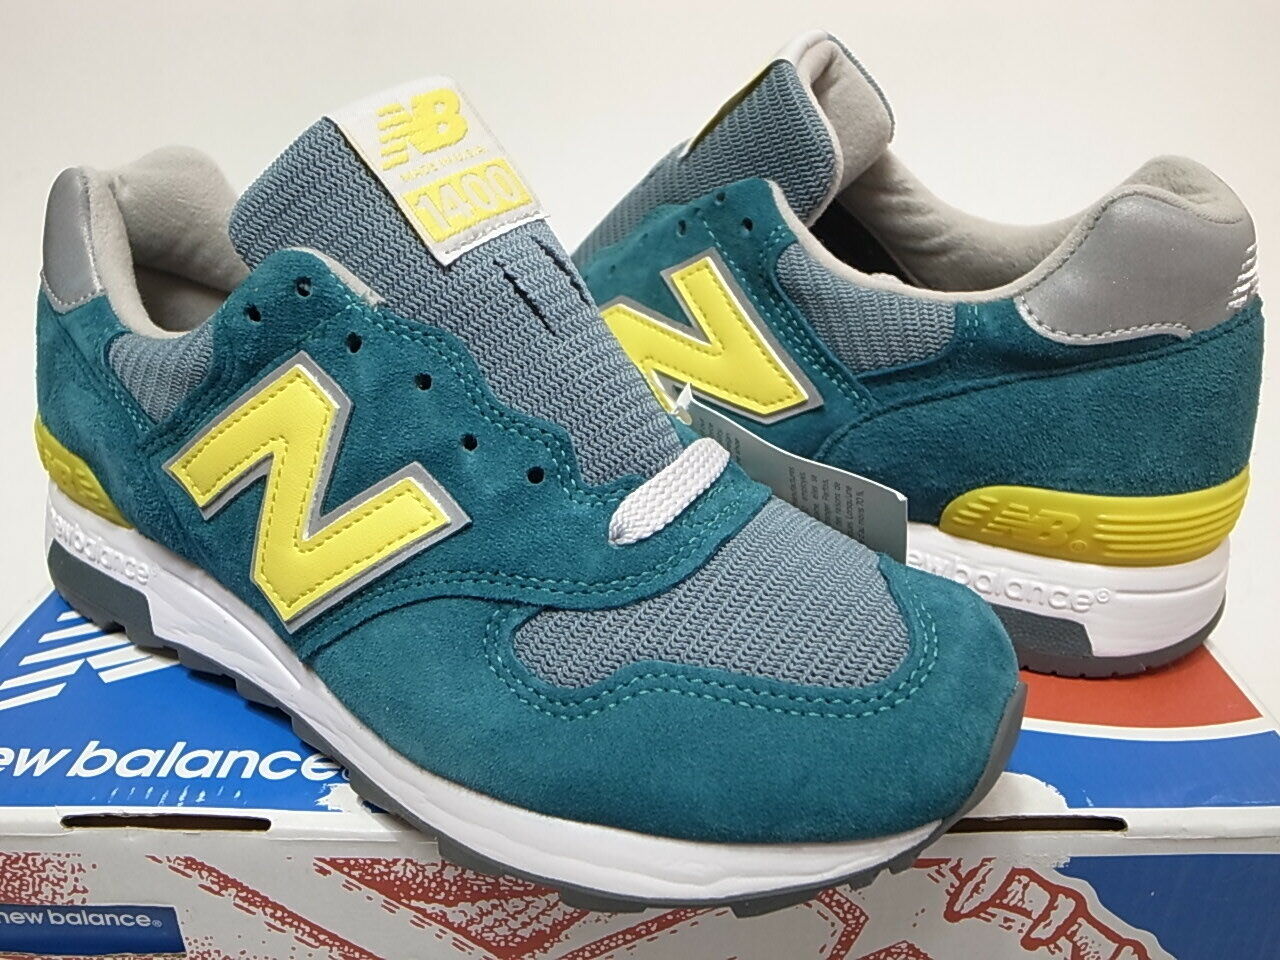 J.CREW x NEW BALANCE M1400FT 1400FT 1400 BLUE YELLOW MADE IN USA sz 7